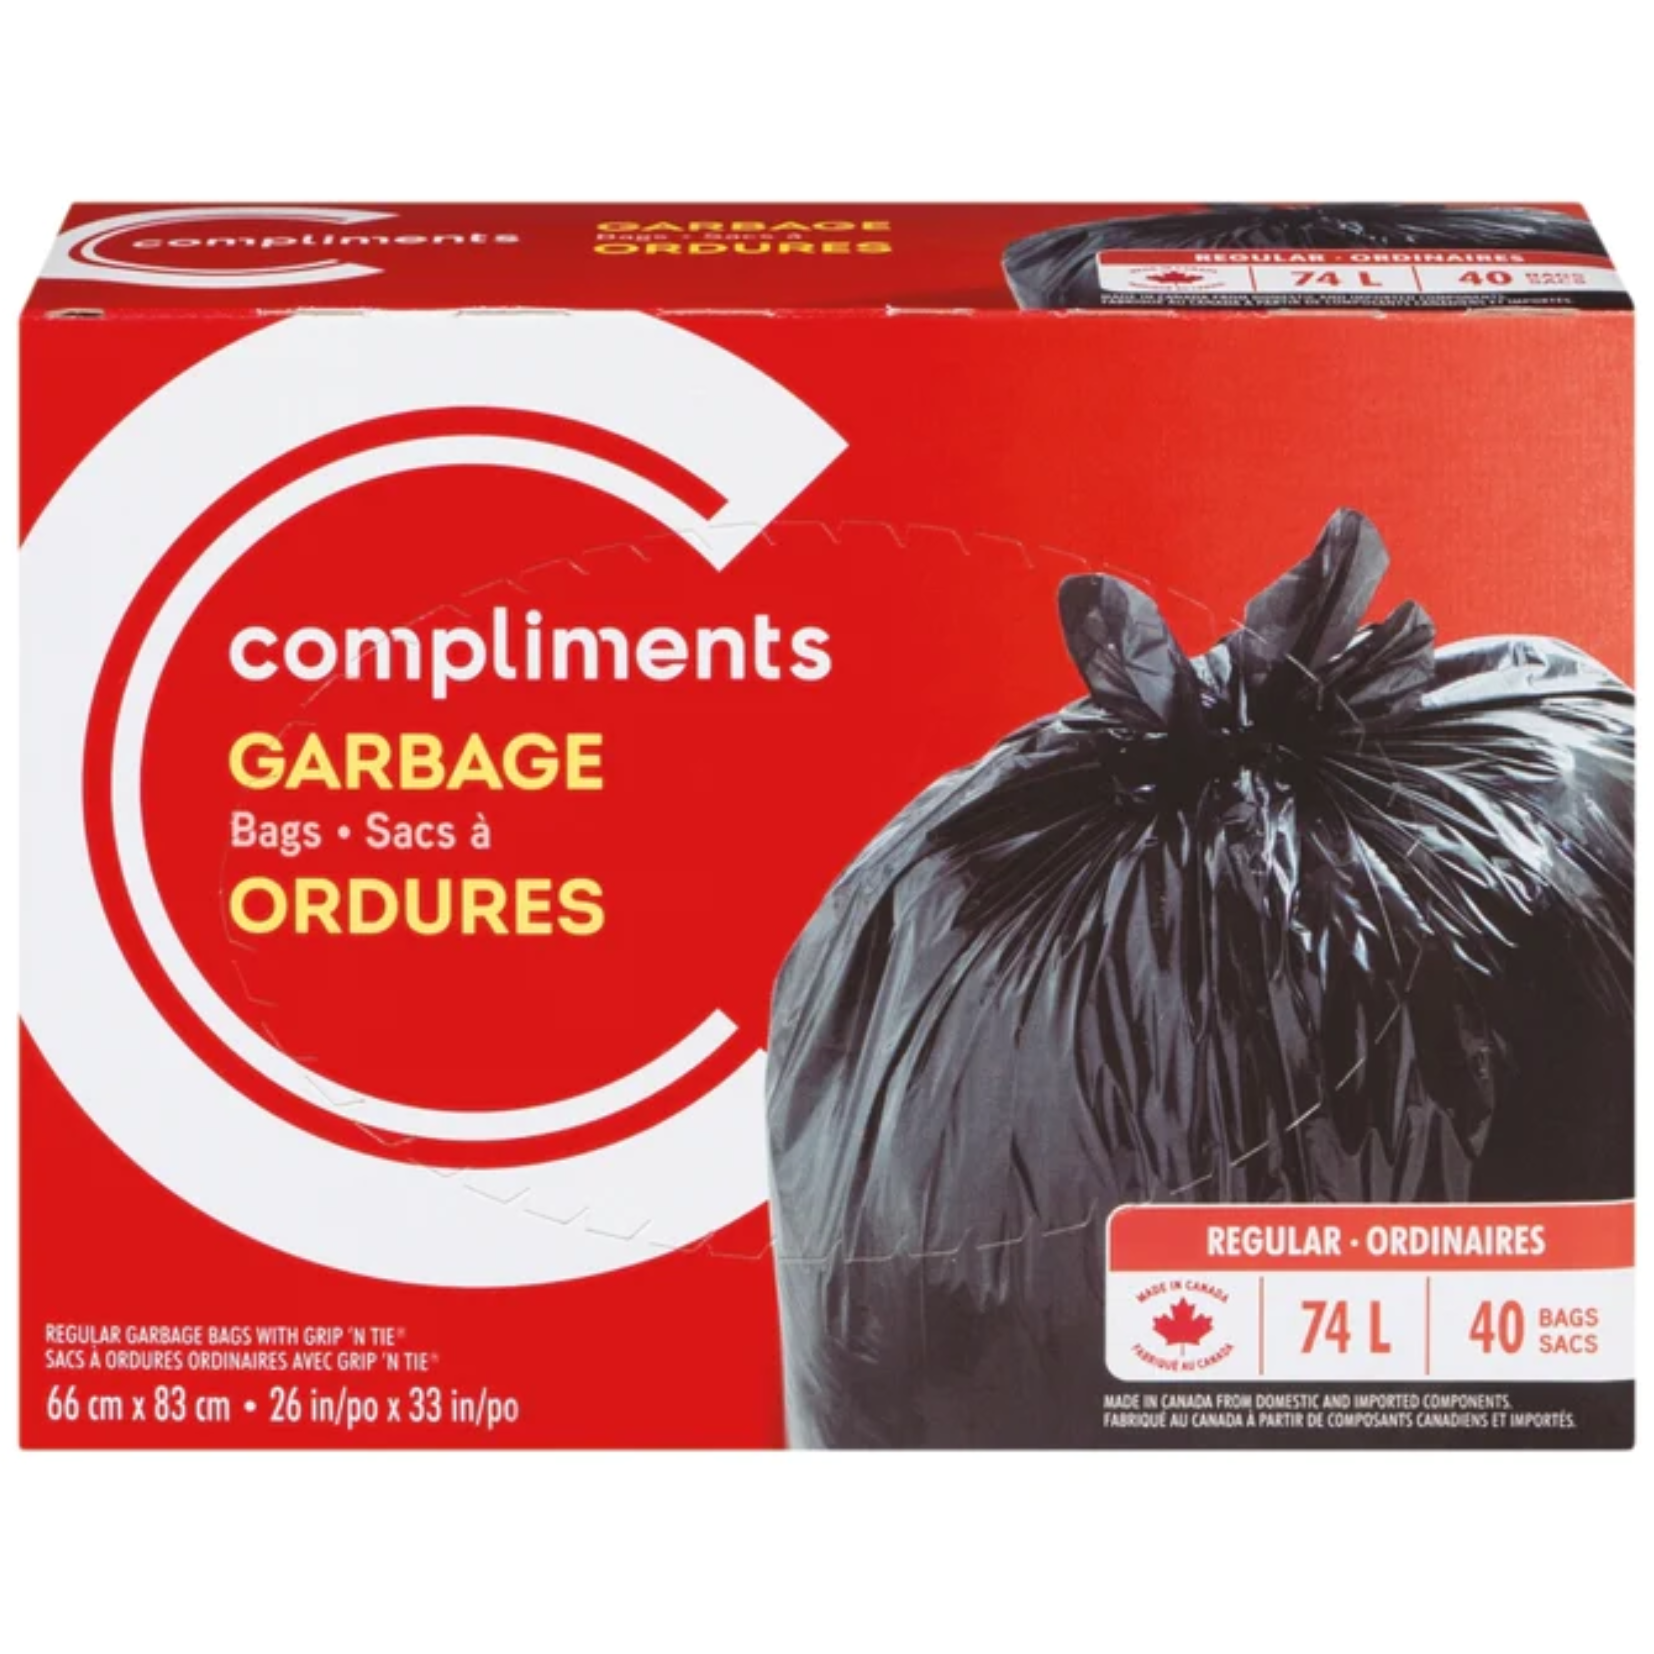 Compliments Garbage Bags 74L x 40